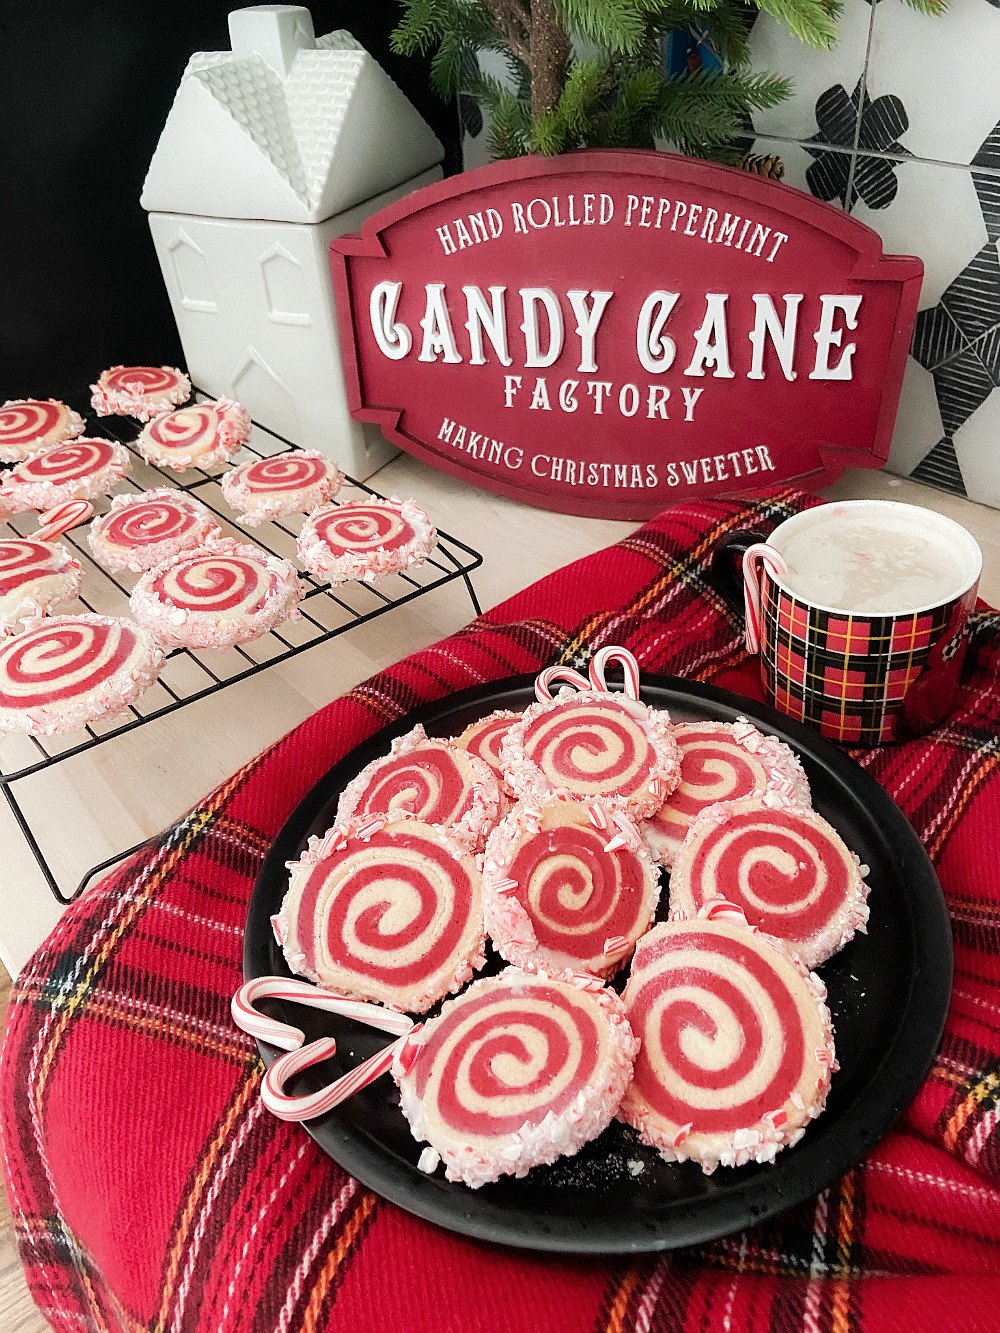 Candy Cane Frosted Swirl Cookies. Take the classic candy cane cookie and give it a modern update by rolling it and frosting it with crushed candy canes!